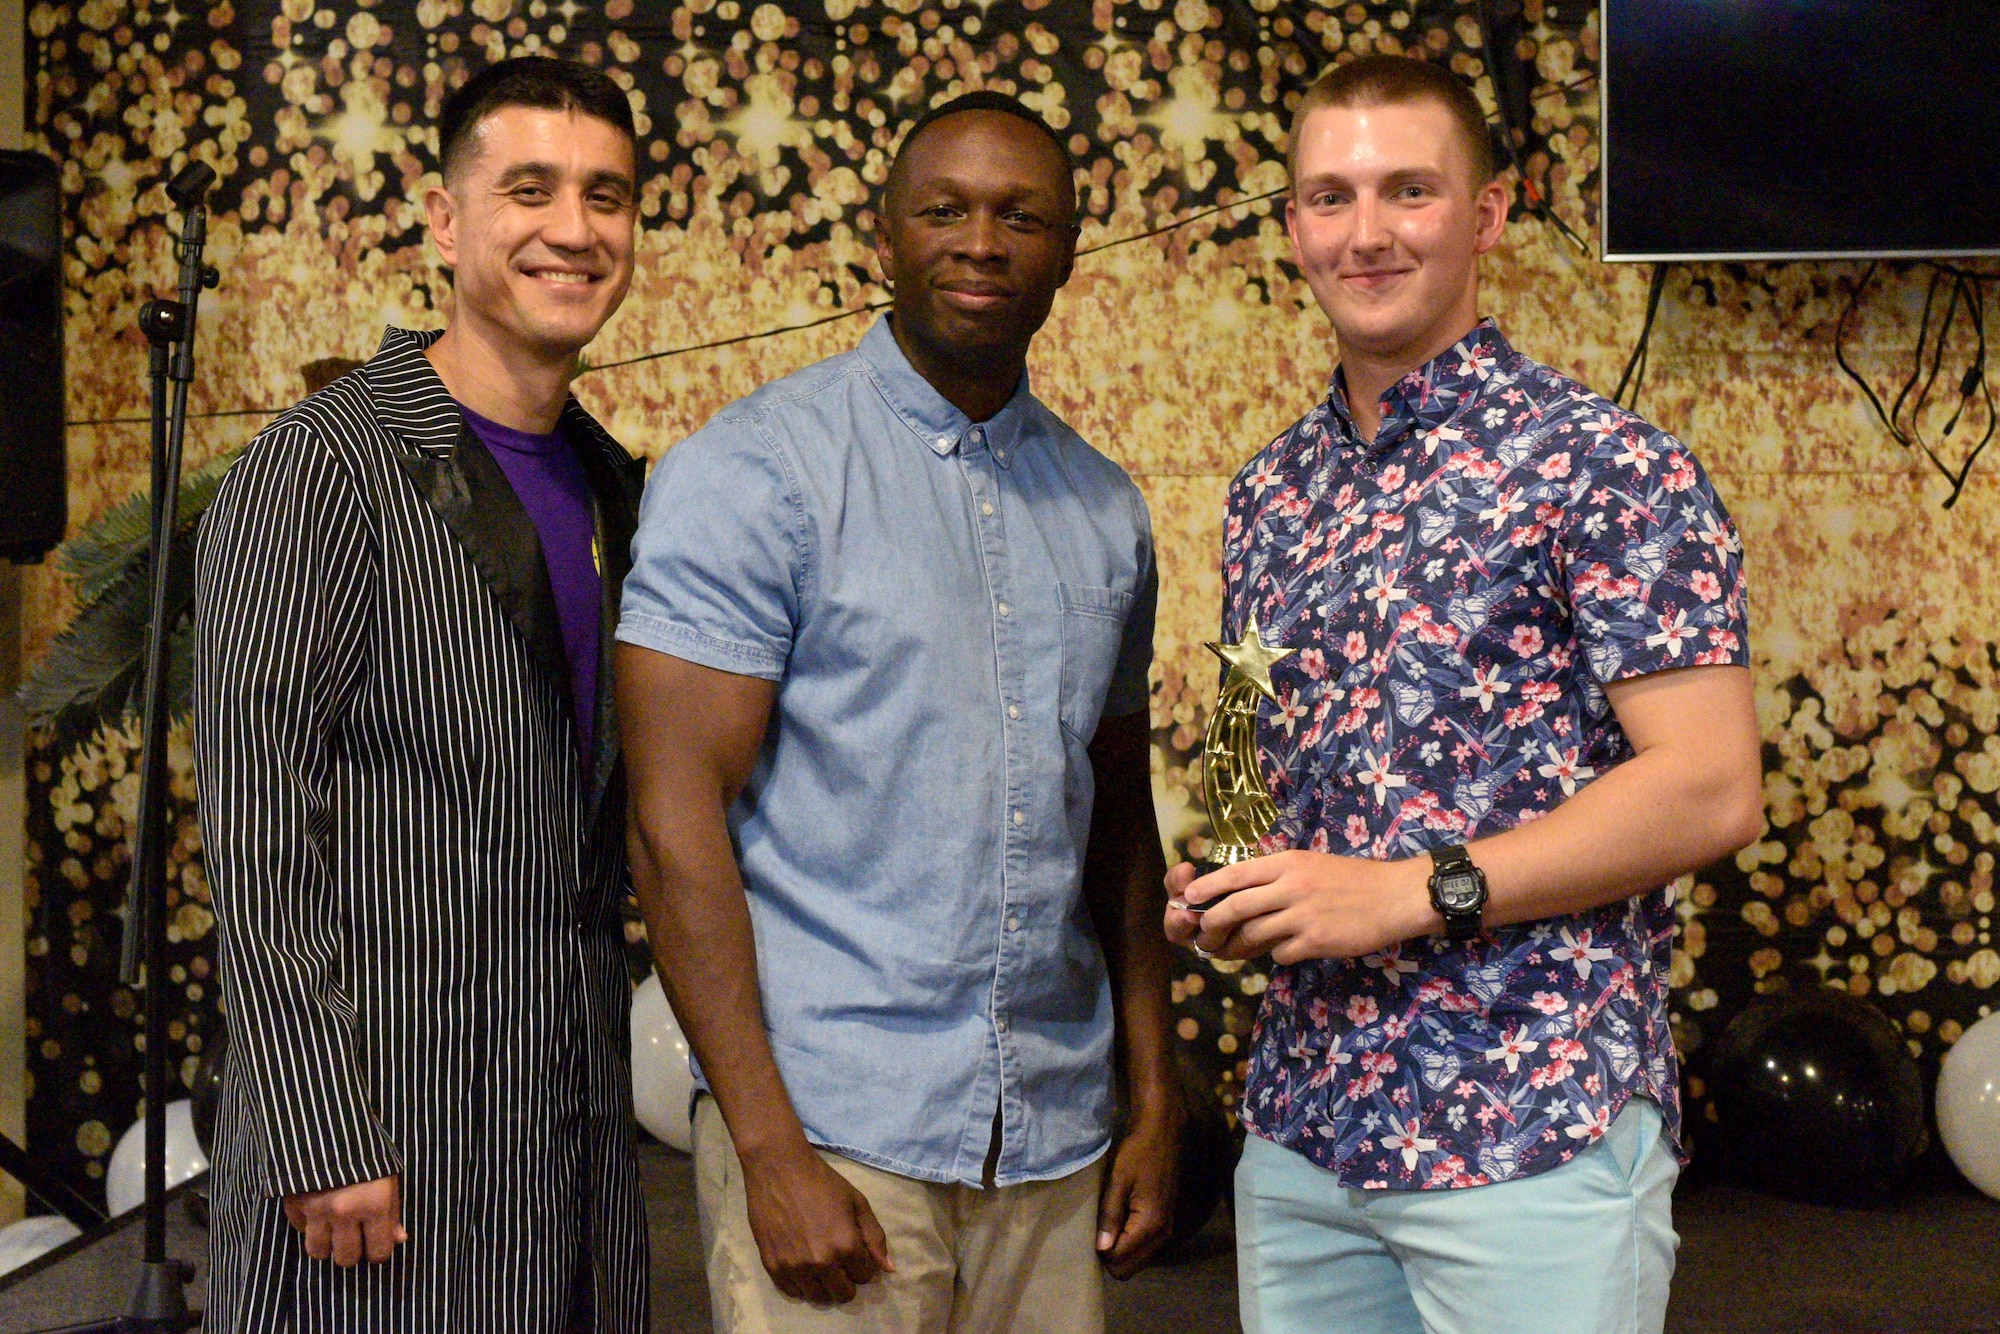 U.S. Air Force Col. Ricky Mills, 17th Training Wing commander and Chief Master Sgt. Lavor Kirkpatrick, 17th TRW command chief, present U.S. Army Pfc. Chris Frazier, 344th Military Intelligence Battalion student, an award for the semi-annual Goodfellow’s Got Talent show at the Crossroads Student Ministry Center on Goodfellow Air Force Base, Texas, July 13, 2018. Frazier won second place for his performance. (U.S. Air Force photo by Senior Airman Randall Moose/Released)